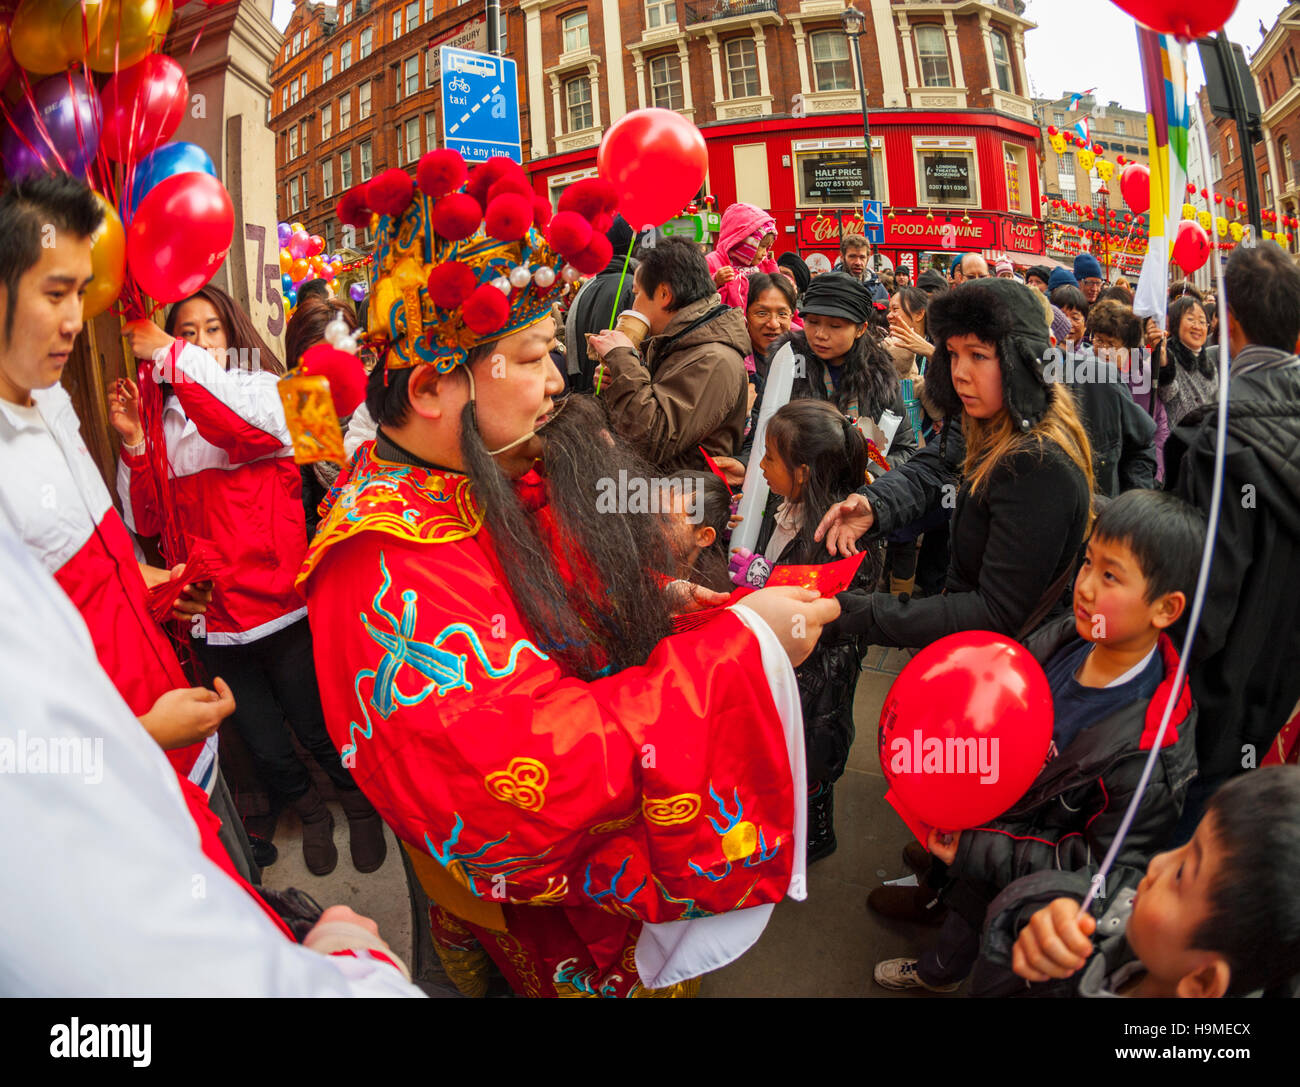 Money being given out as good luck at Chinese New year celebrations in London Stock Photo